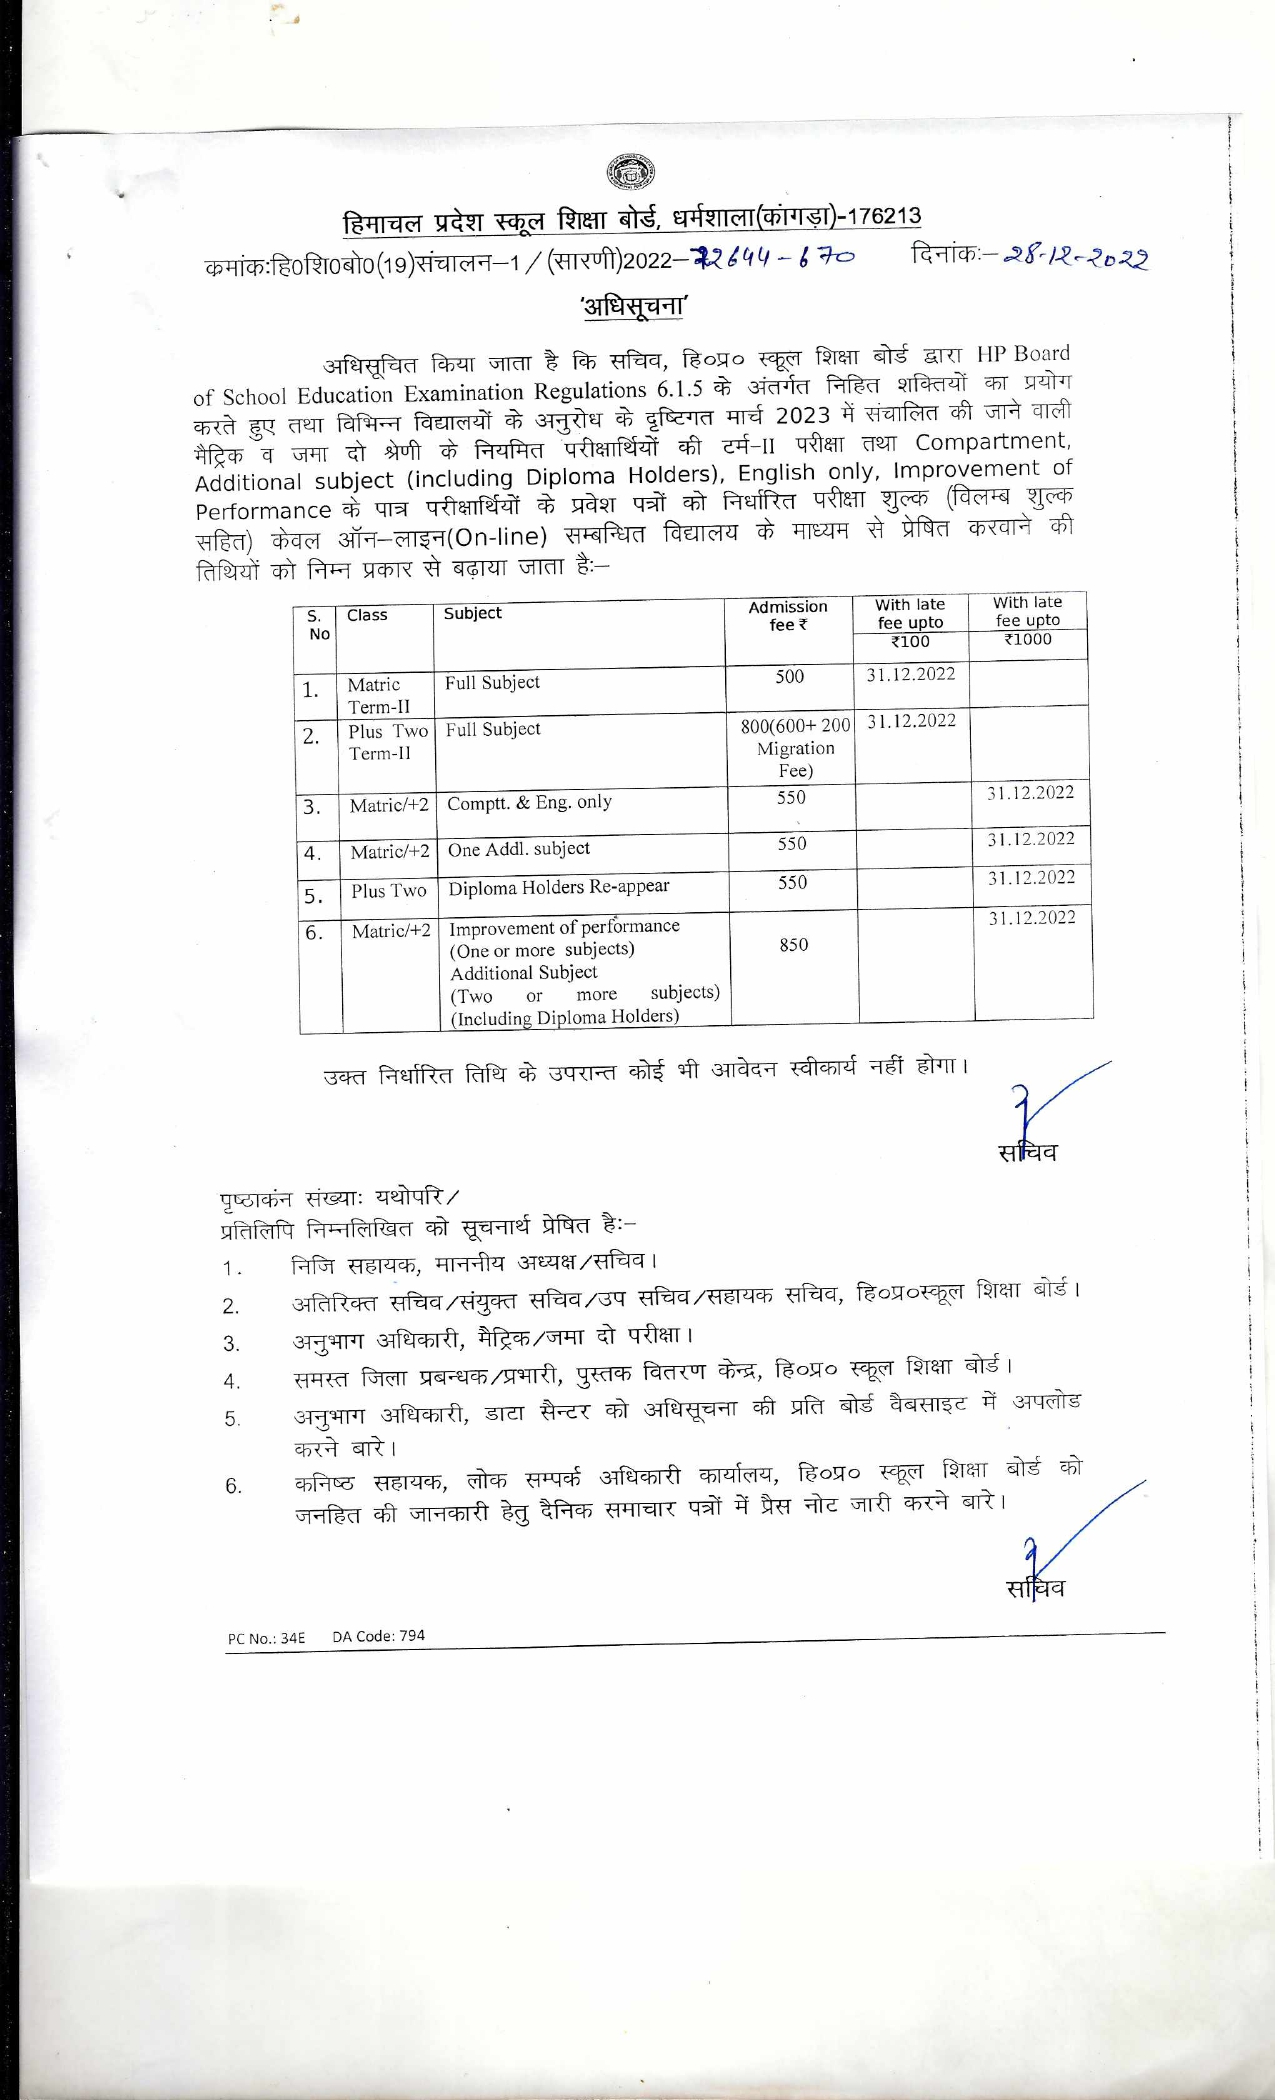 Notification Regarding Date Extension for Compartment,Improvement,Additional,Examination Fees(Term-II) March 2023